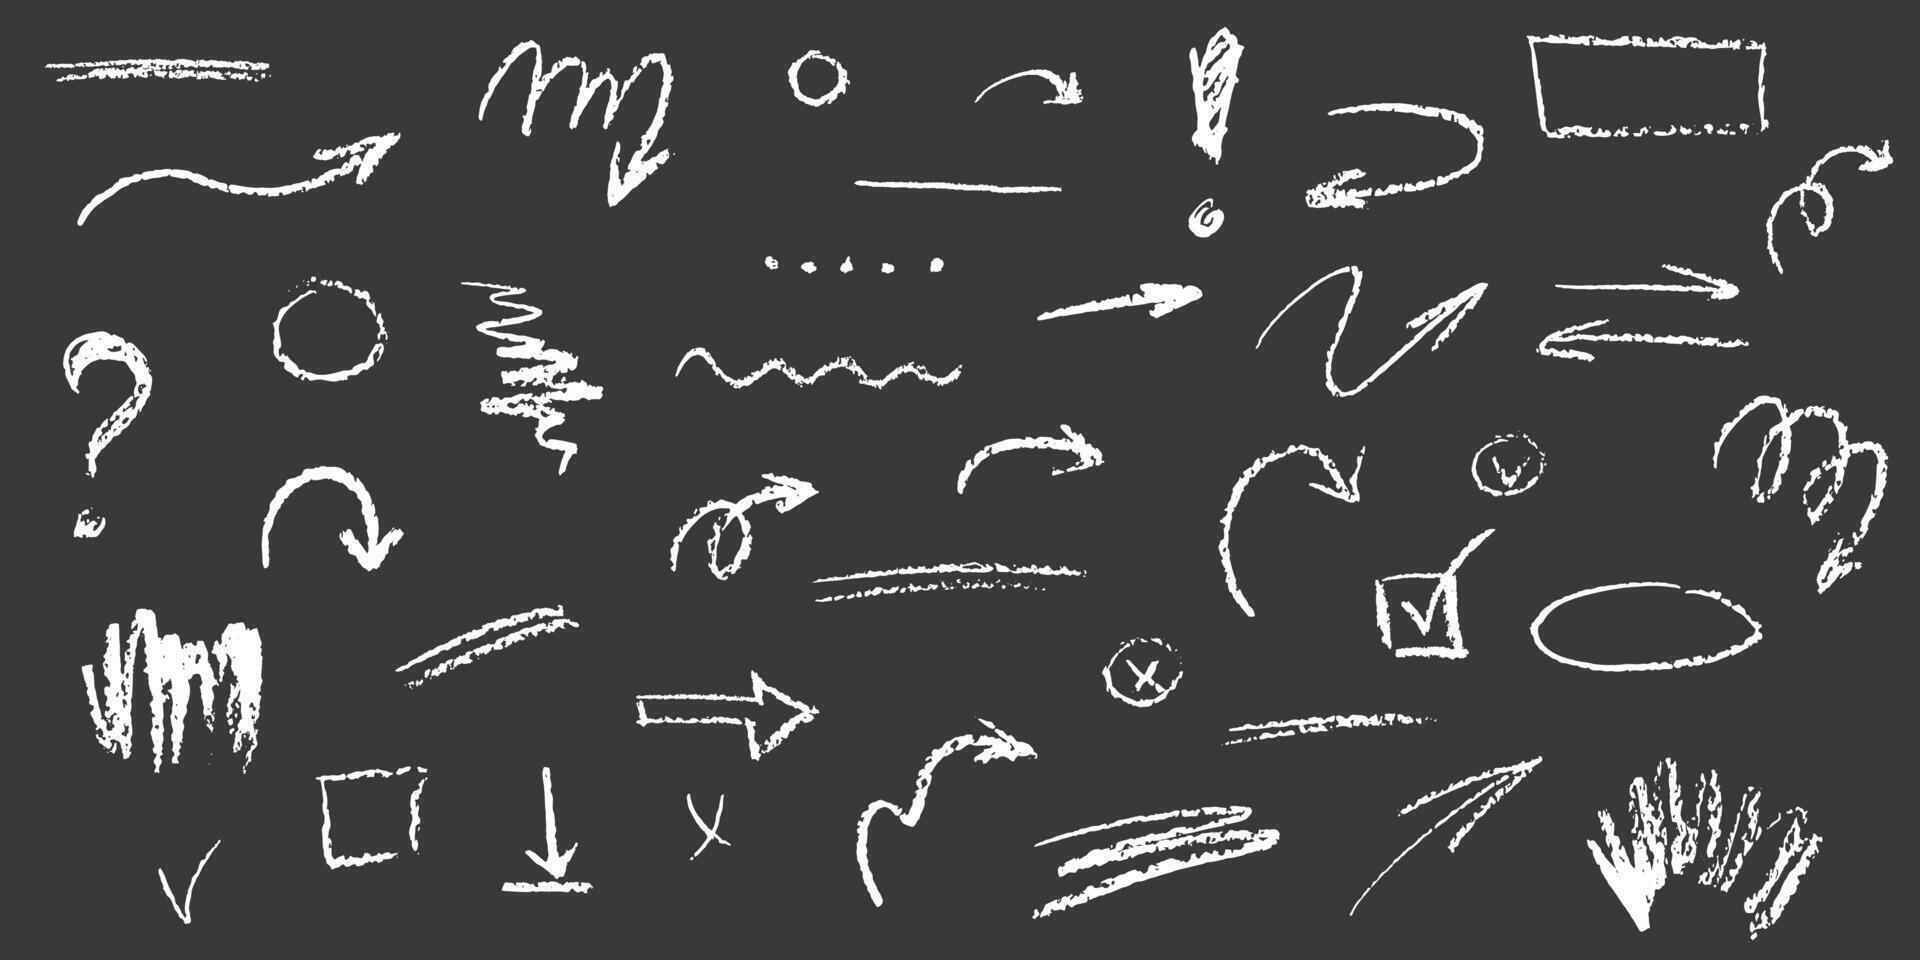 Charcoal elements vector set. Hand drawn freehand different curved lines, swirls arrows and borders. Doodle marker drawing, chalk smears. Isolated Scribbles and scrawls on a black background